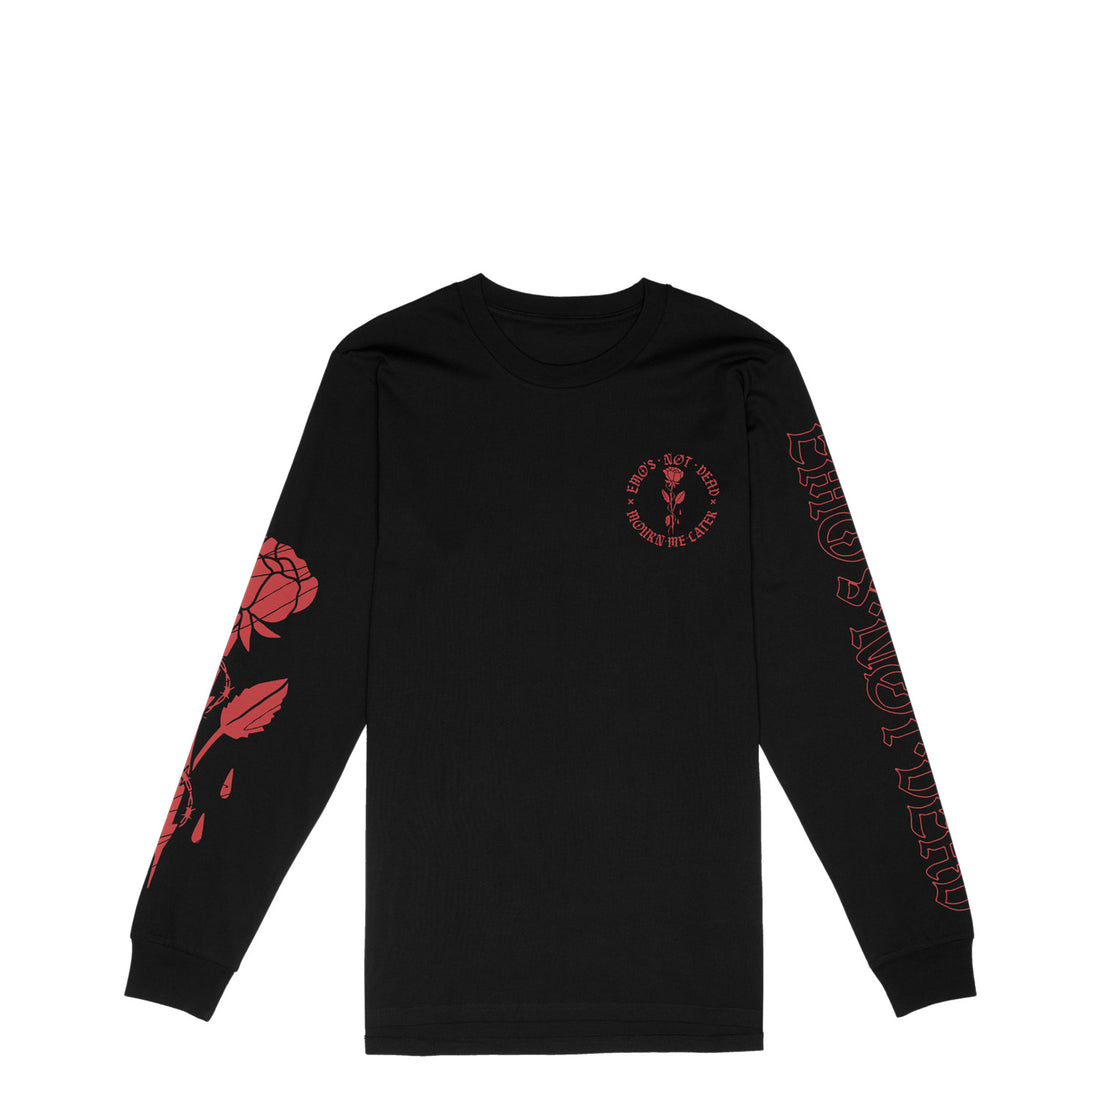 Mourn Me Later Long Sleeve - Black